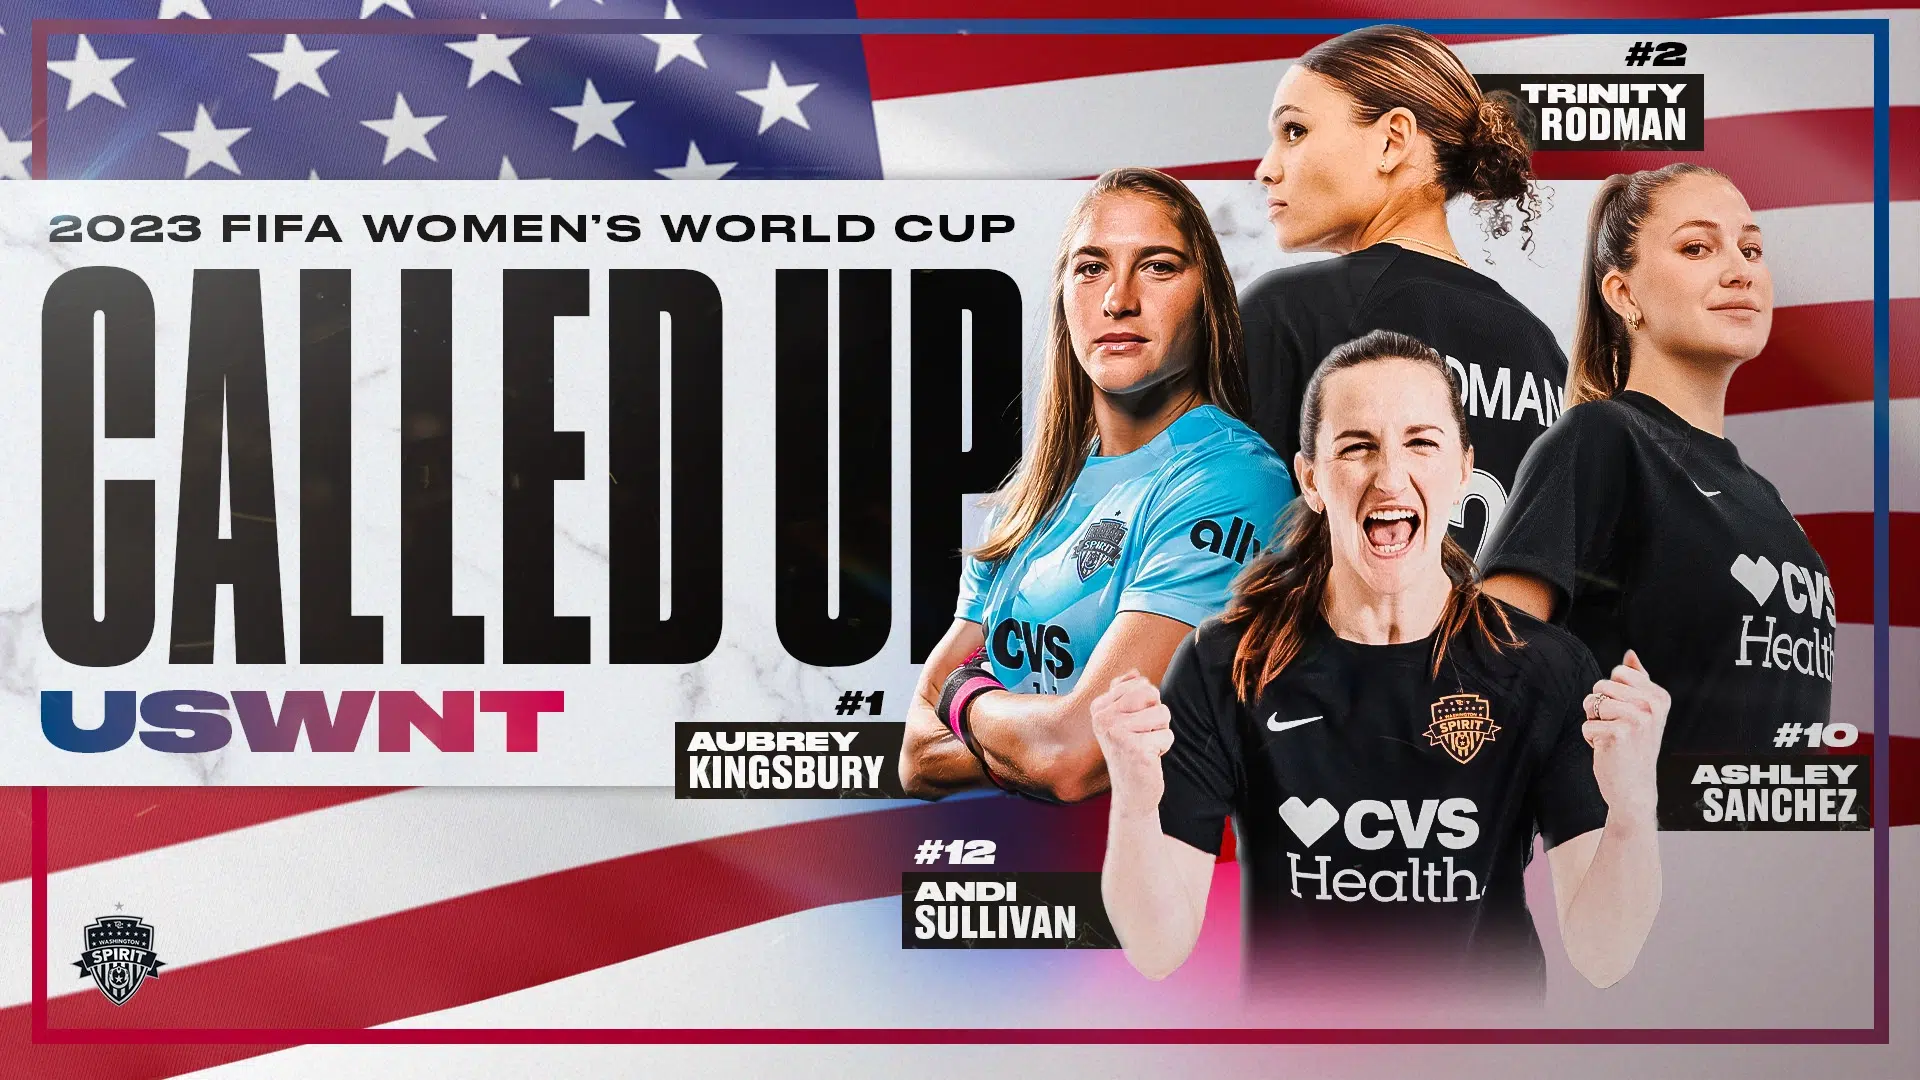 Four Spirit Players Named to USWNT’s 2023 FIFA Women’s World Cup Roster Featured Image